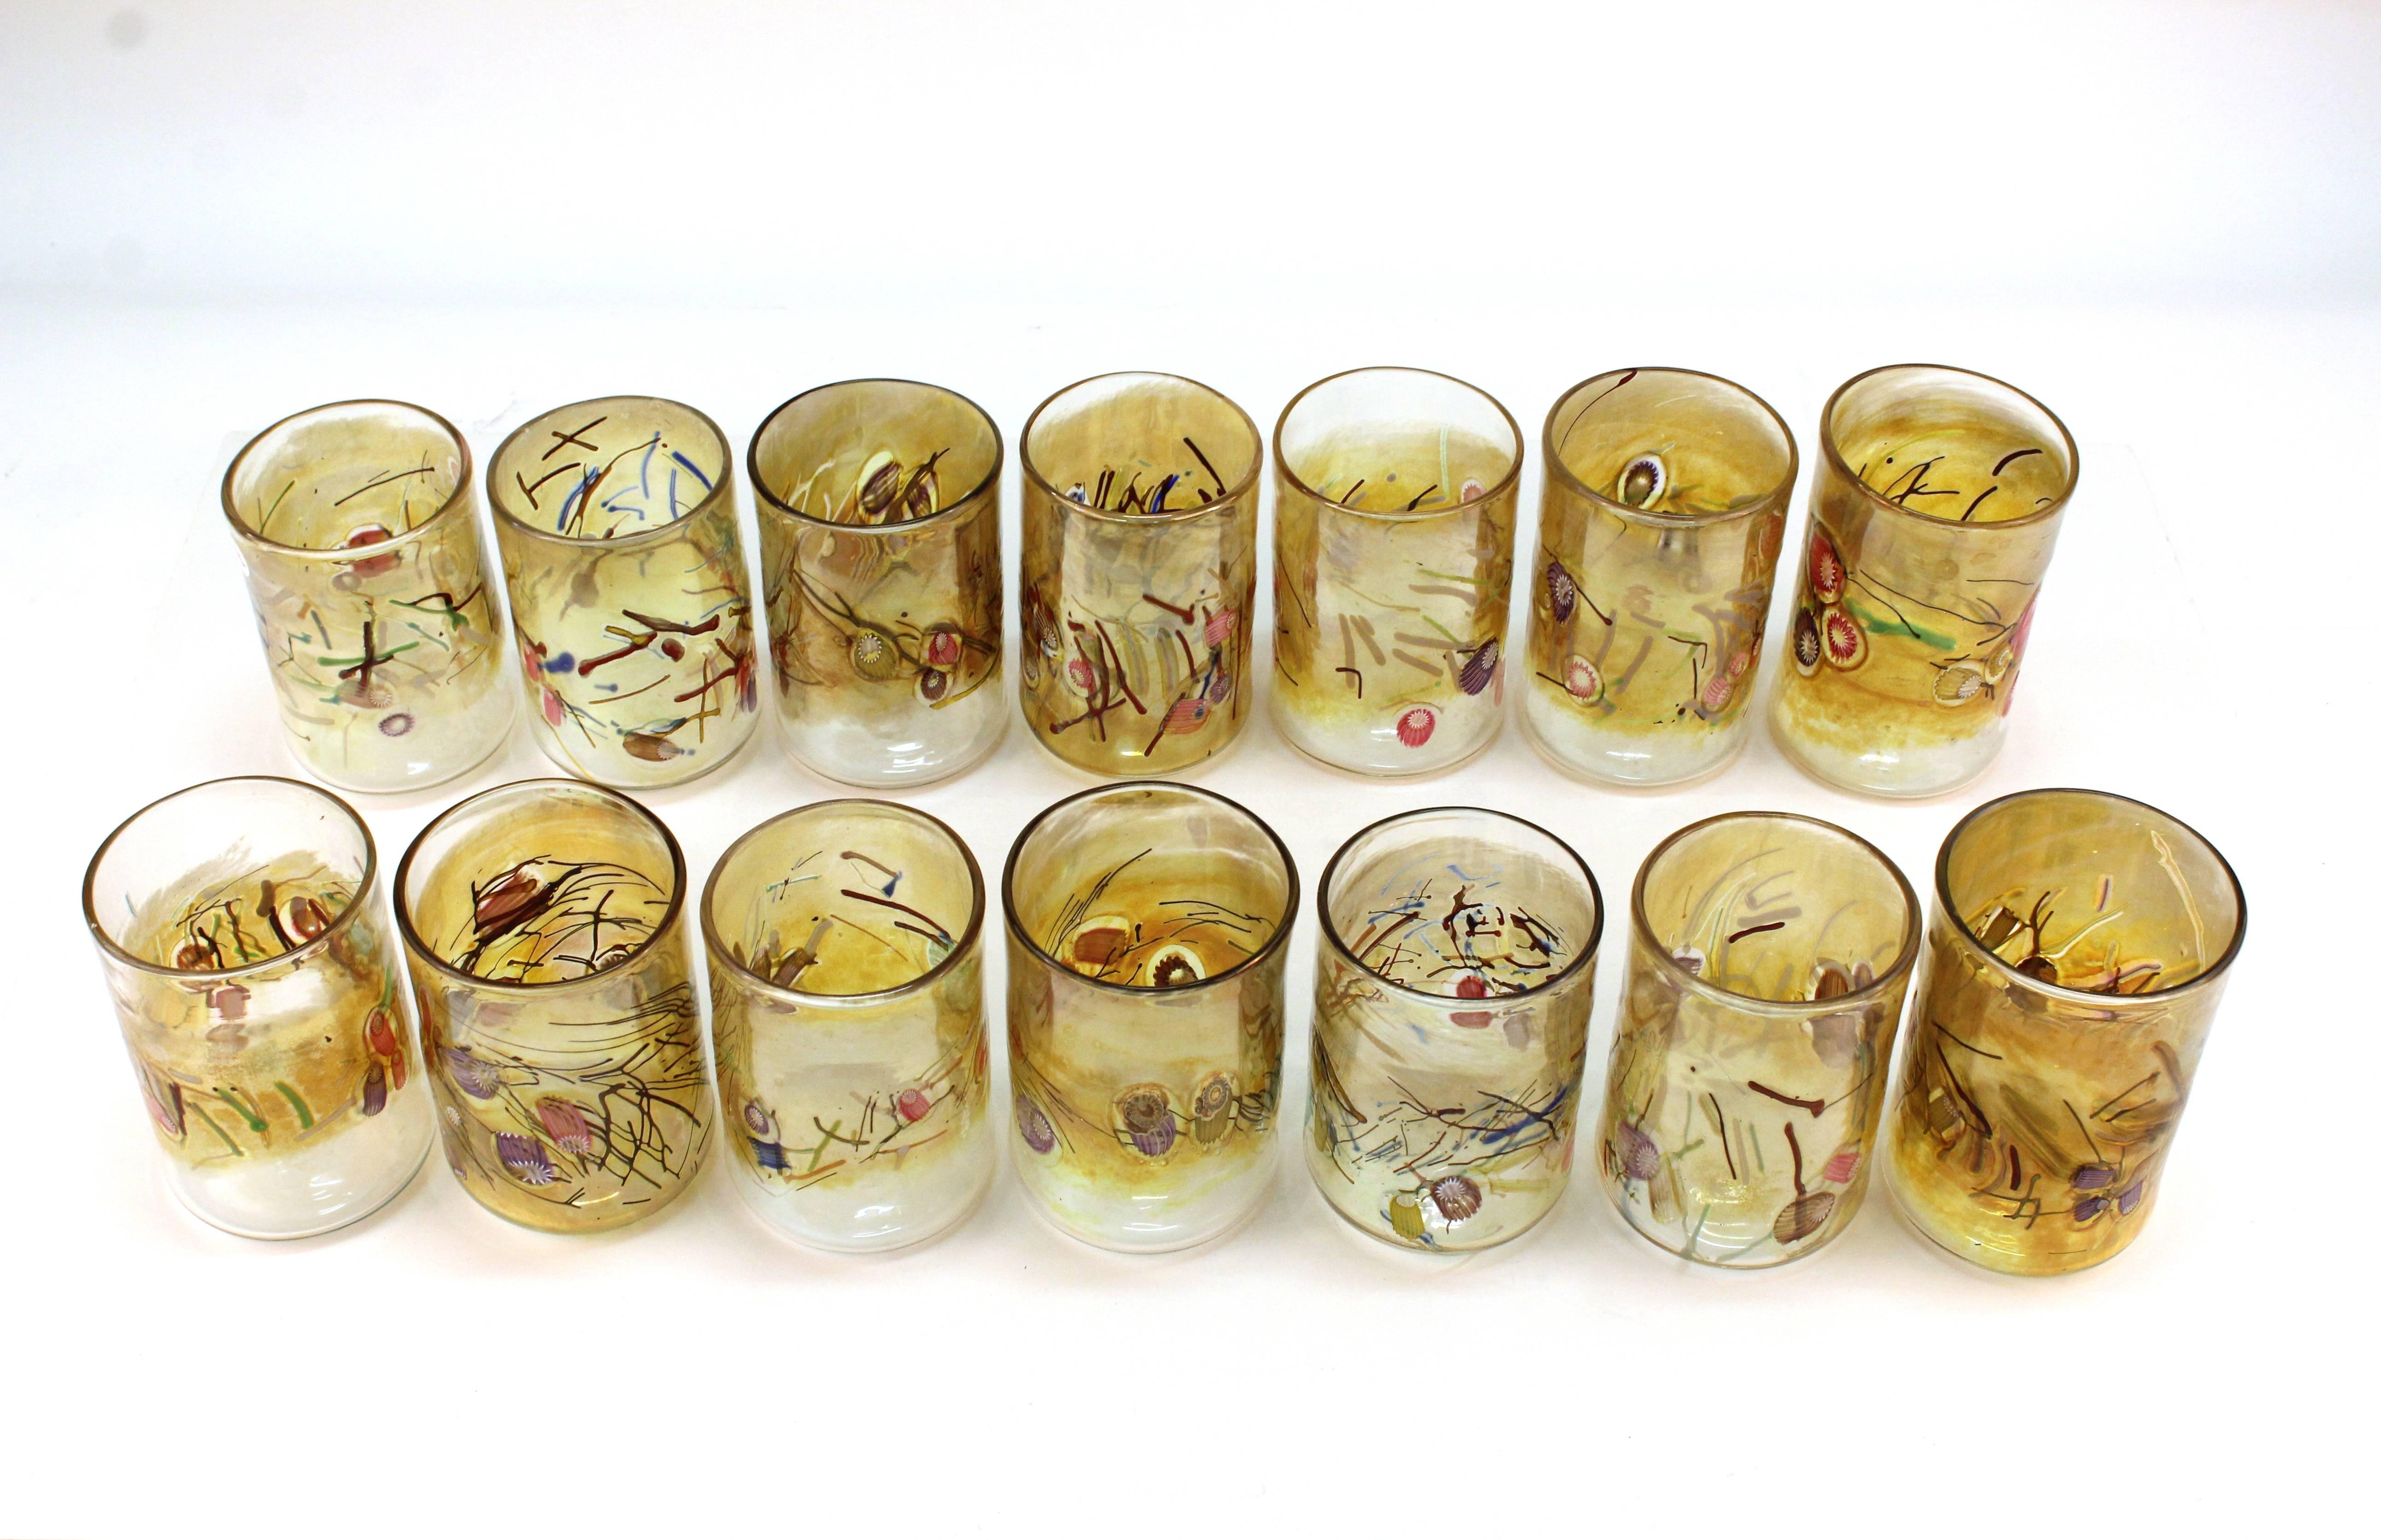 Set of 14 sea themed glasses by contemporary Hawaiian artist Paul Counts. Each glass was designs with faux coral, seaweed and shells made from murine canes. Signed PAC on bottom of each glass. In very good condition.